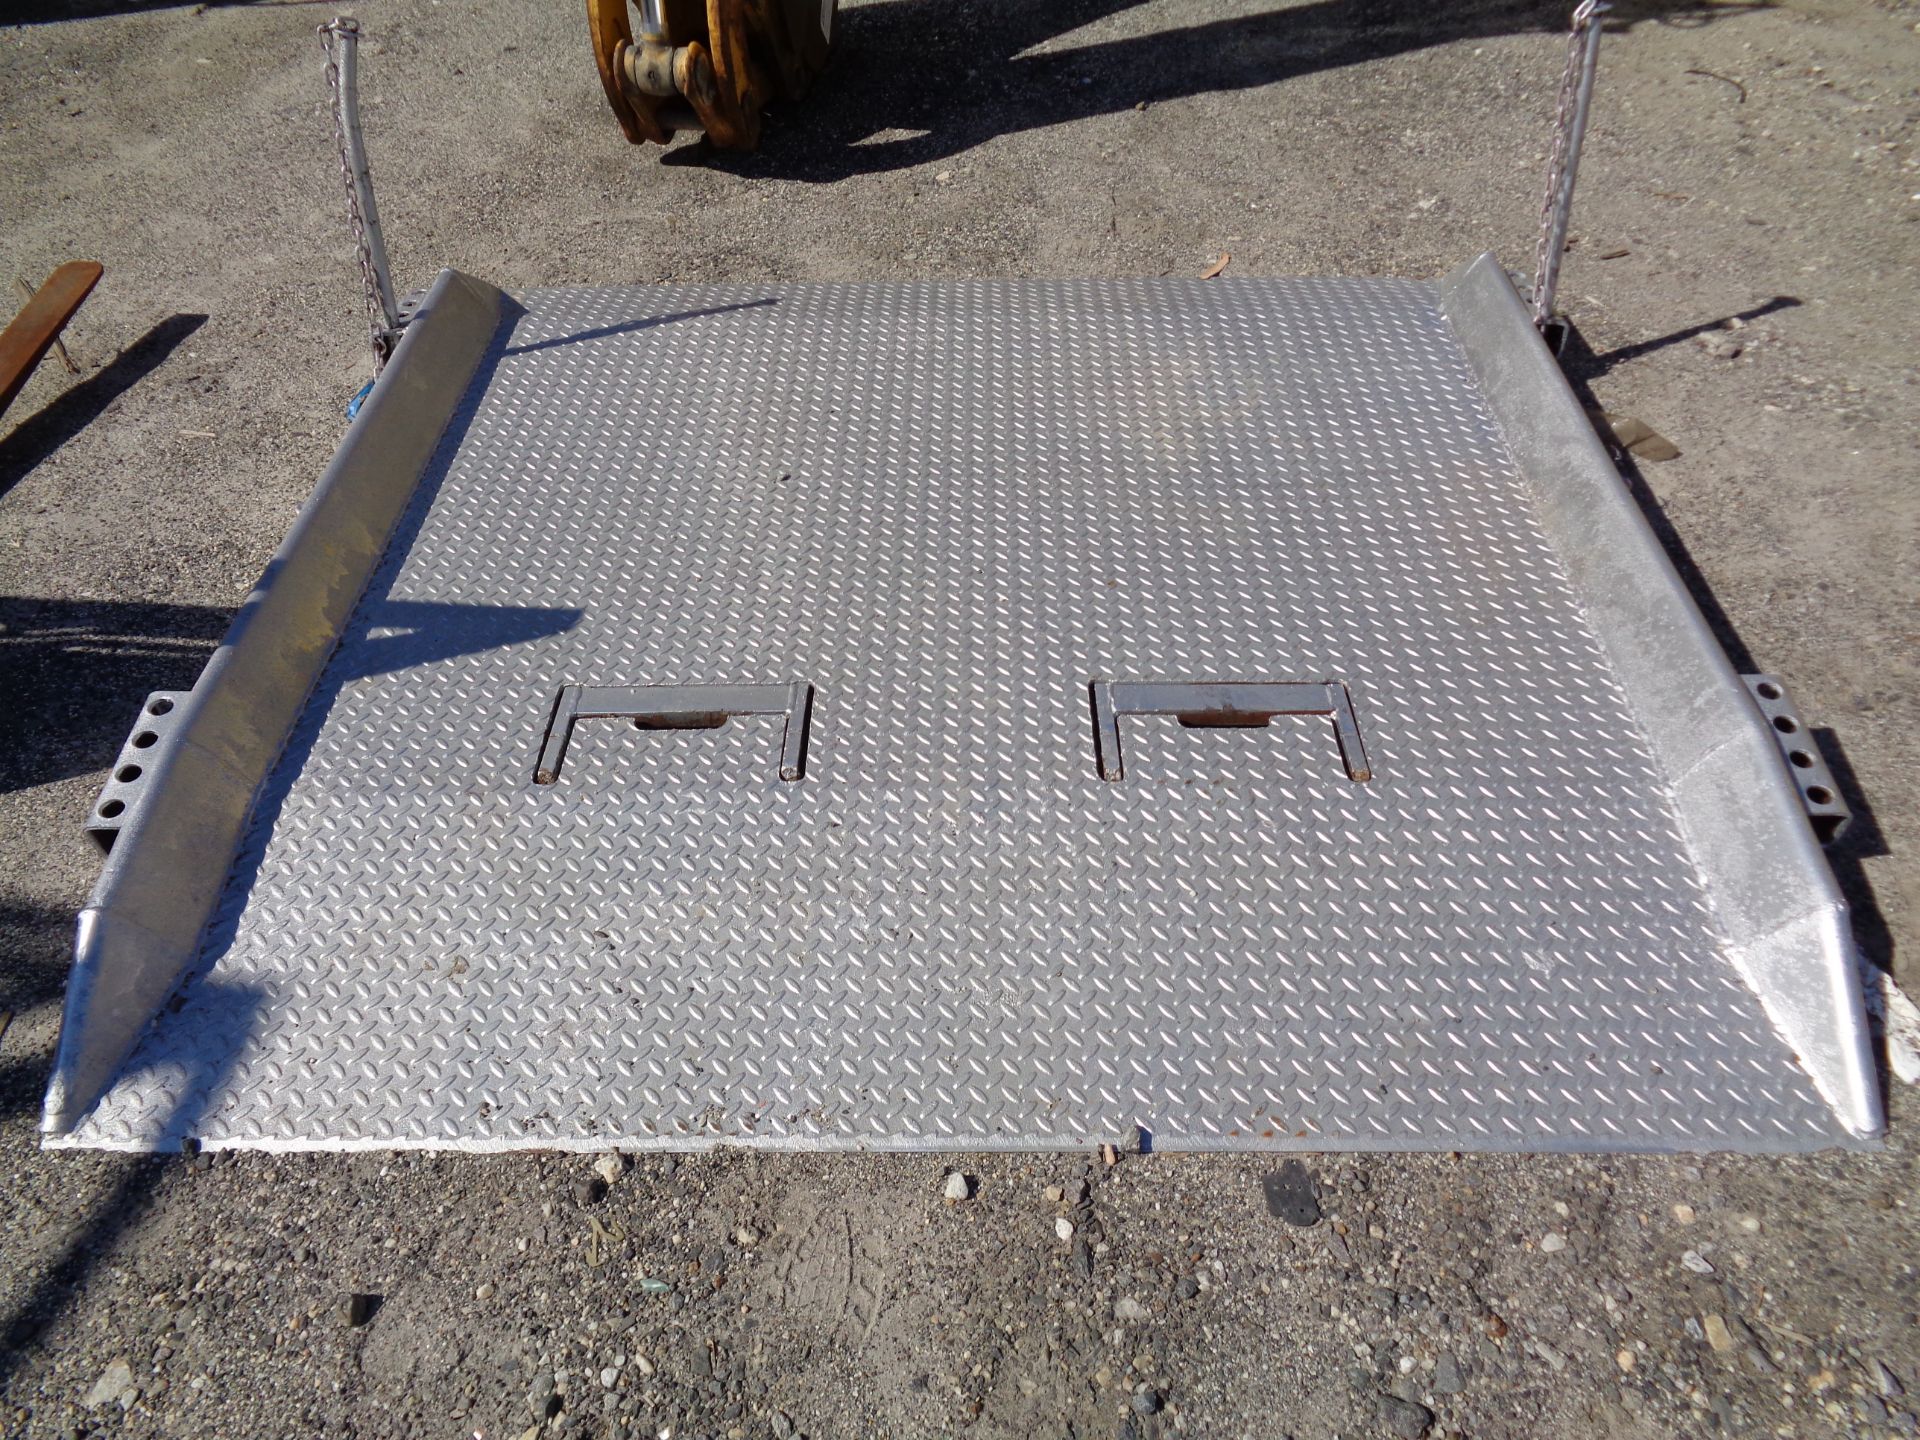 65" Wide Loading Dock Plate - Image 2 of 2